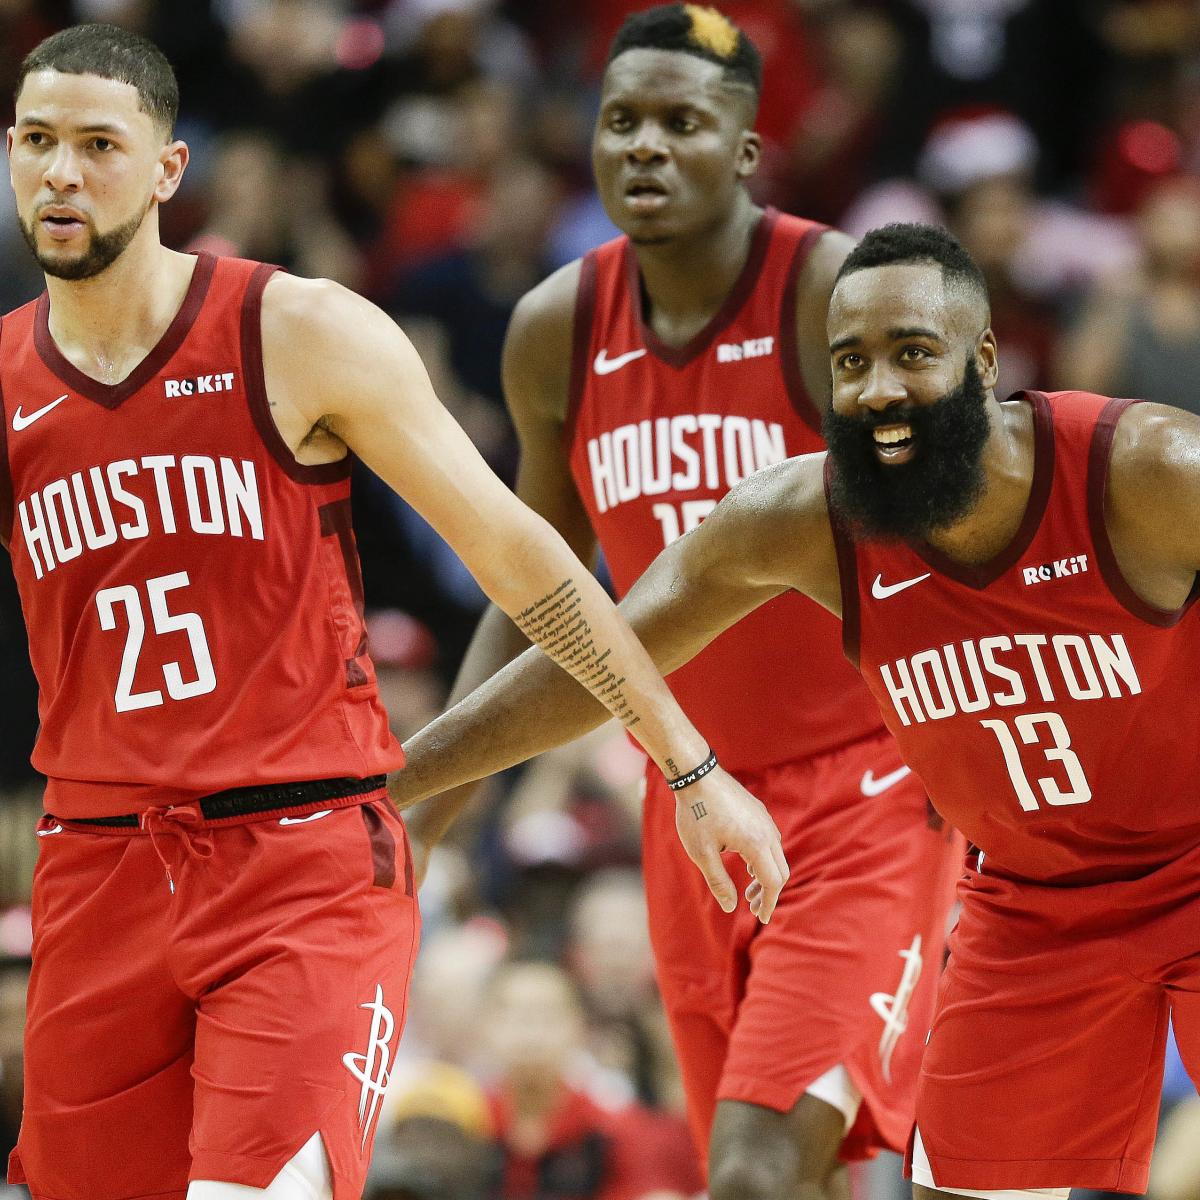 Kelly Iko: If Chris Paul becomes available, the Houston Rockets could  consider acquiring him : r/rockets